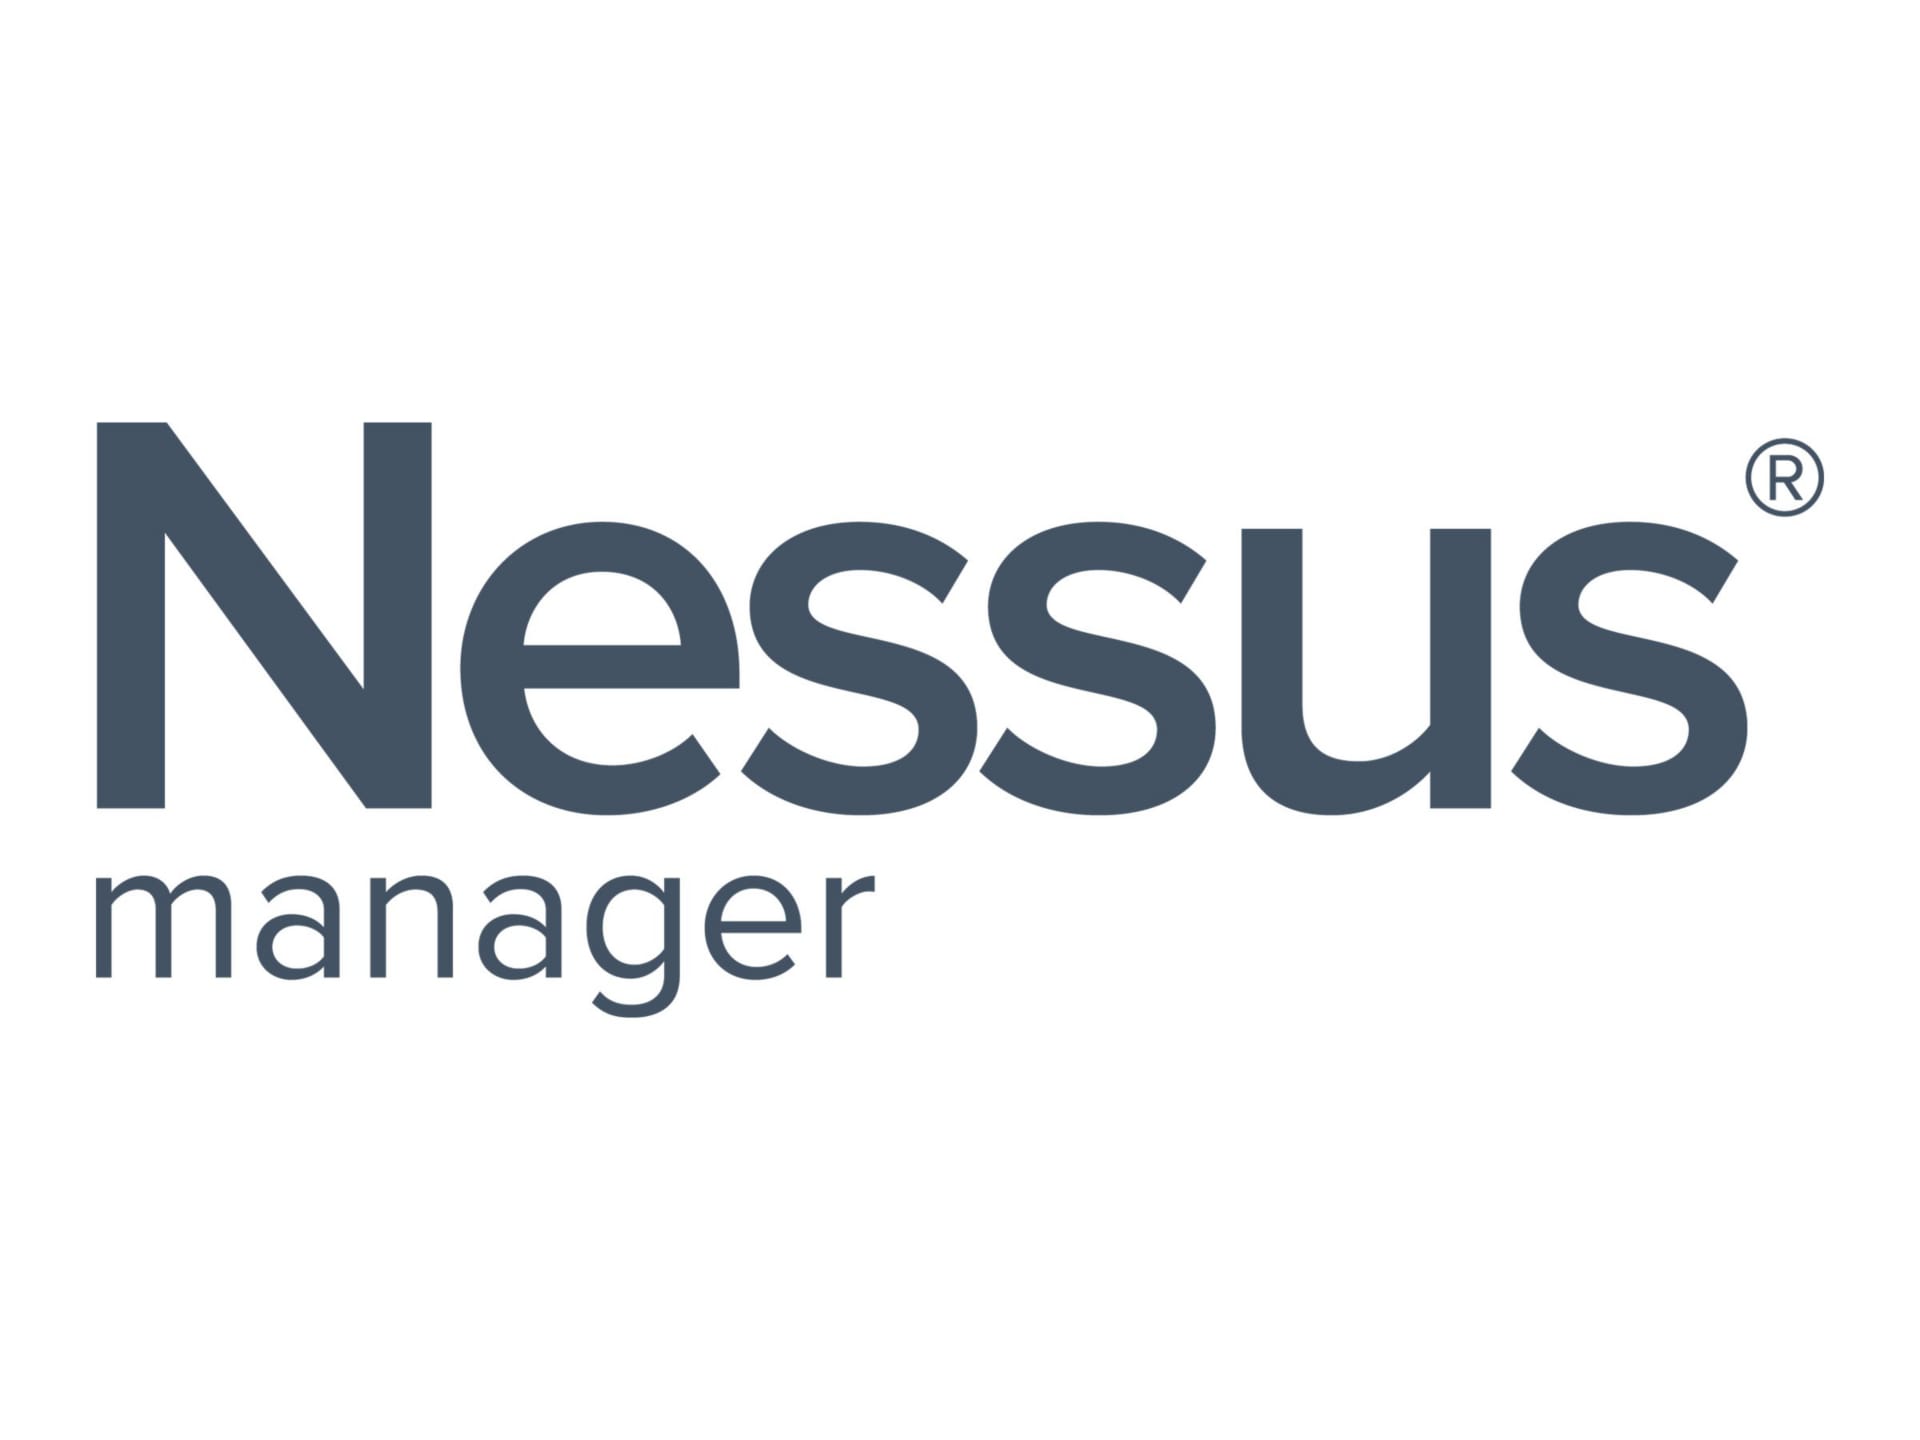 Nessus Manager - On-Premise subscription license (1 year) - 1536 hosts, 1536 agents, 6 additional scanners